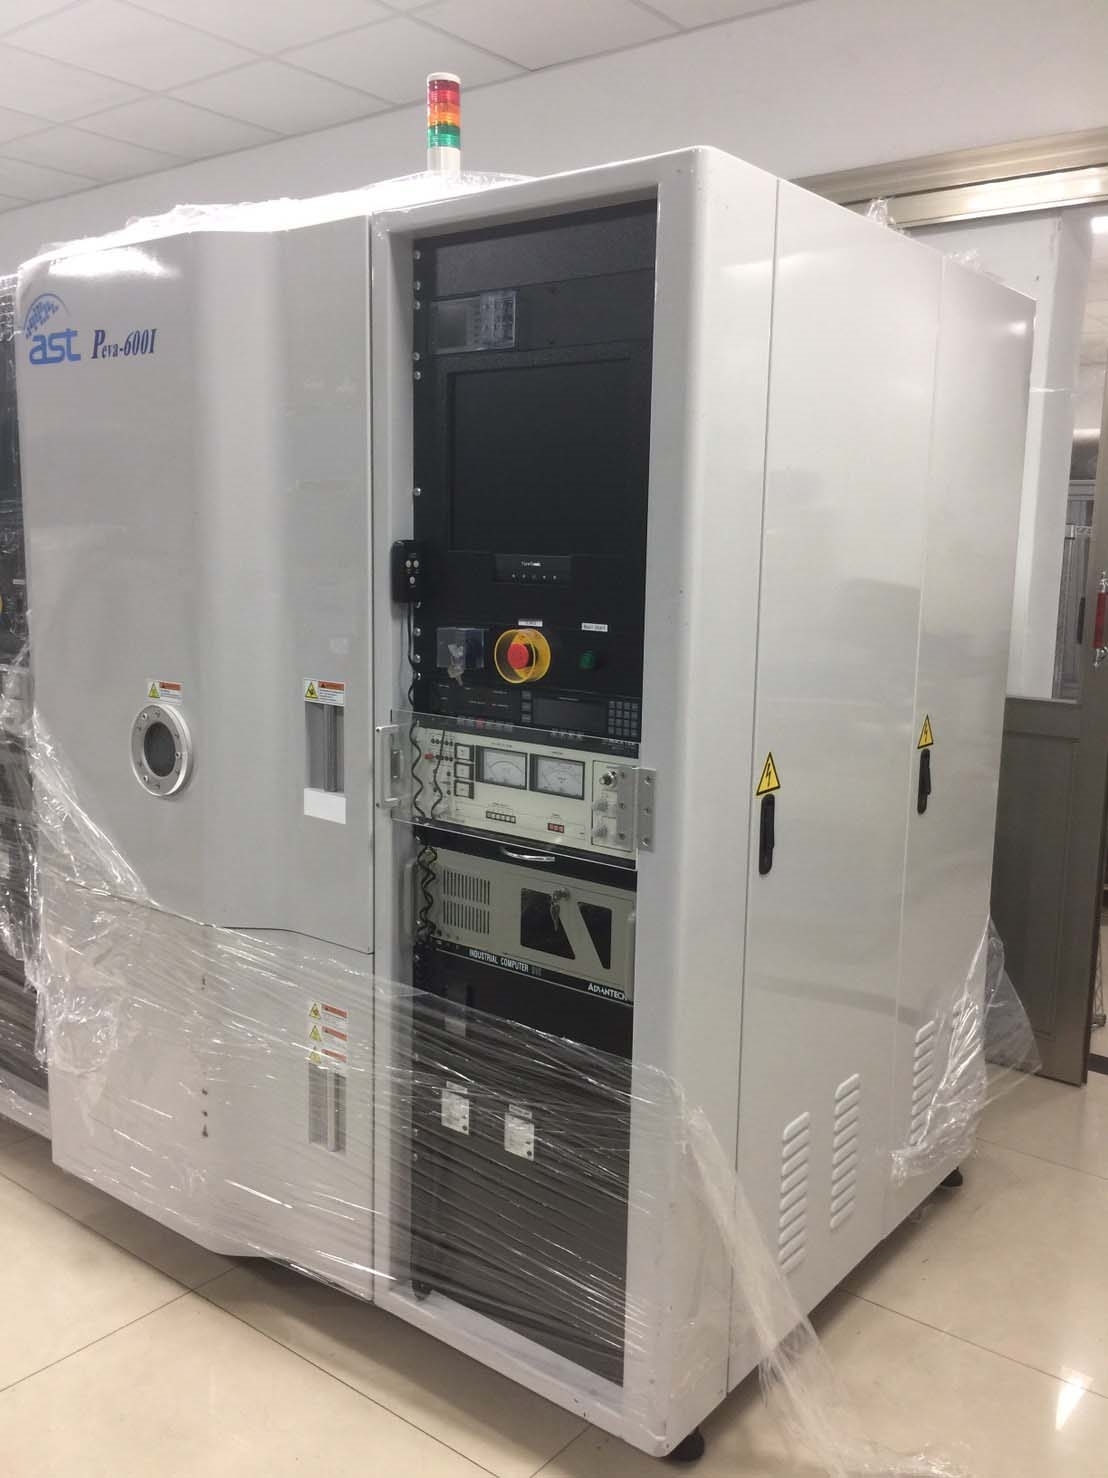 Photo Used AST / ADVANCED SYSTEM TECHNOLOGY Peva-600I For Sale